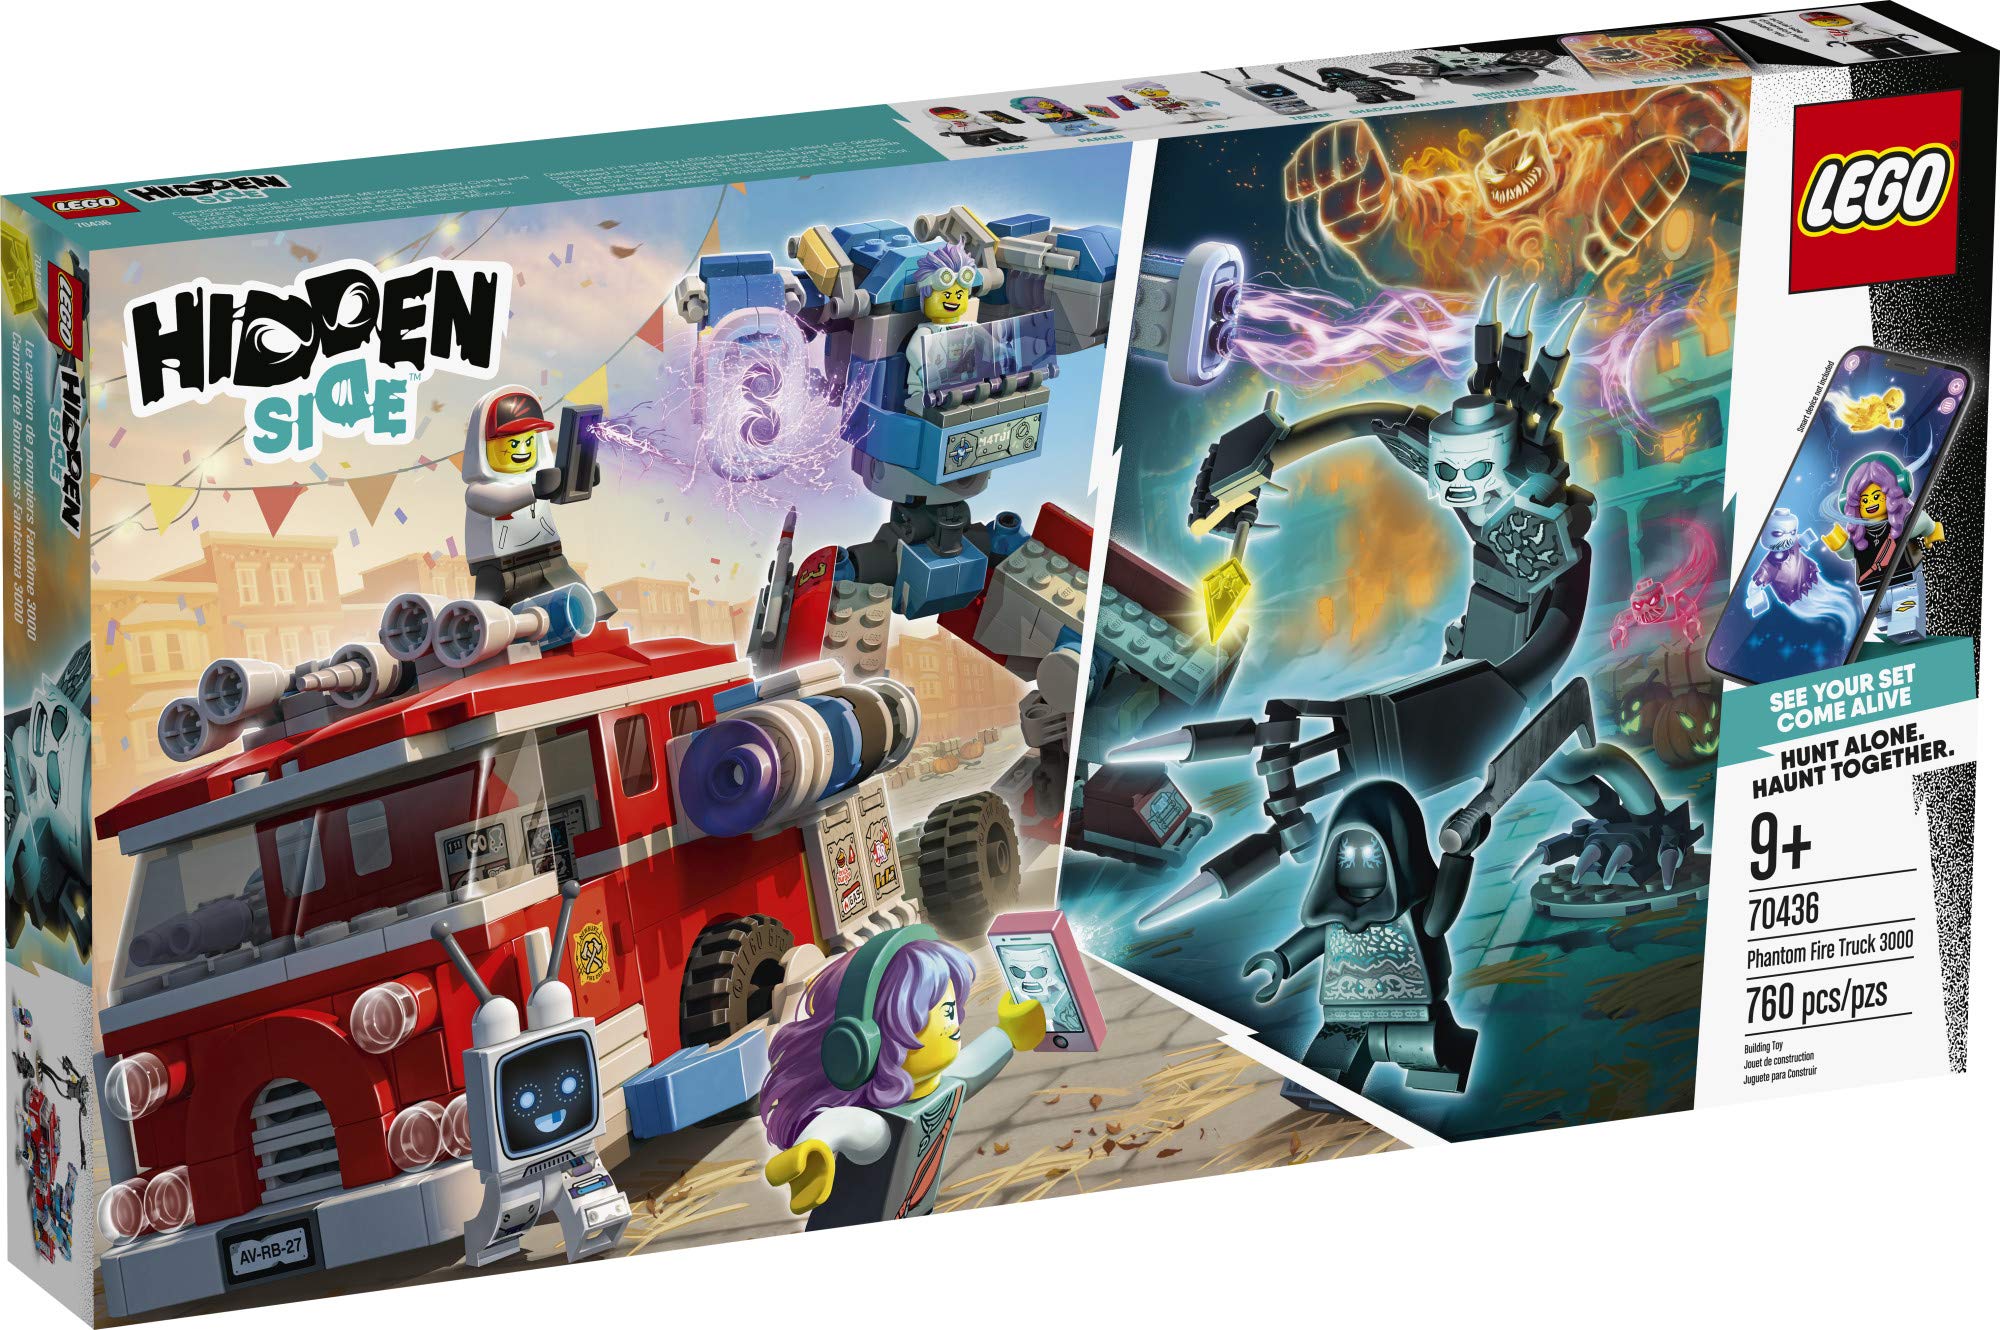 LEGO Hidden Side Phantom Fire Truck 3000 70436, Augmented Reality (AR) Fire Truck Toy, App-Driven Ghost-Hunting Kit, Includes a Mecha Robot, 5 Minifigures and a Harbinger Figure (760 Pieces)